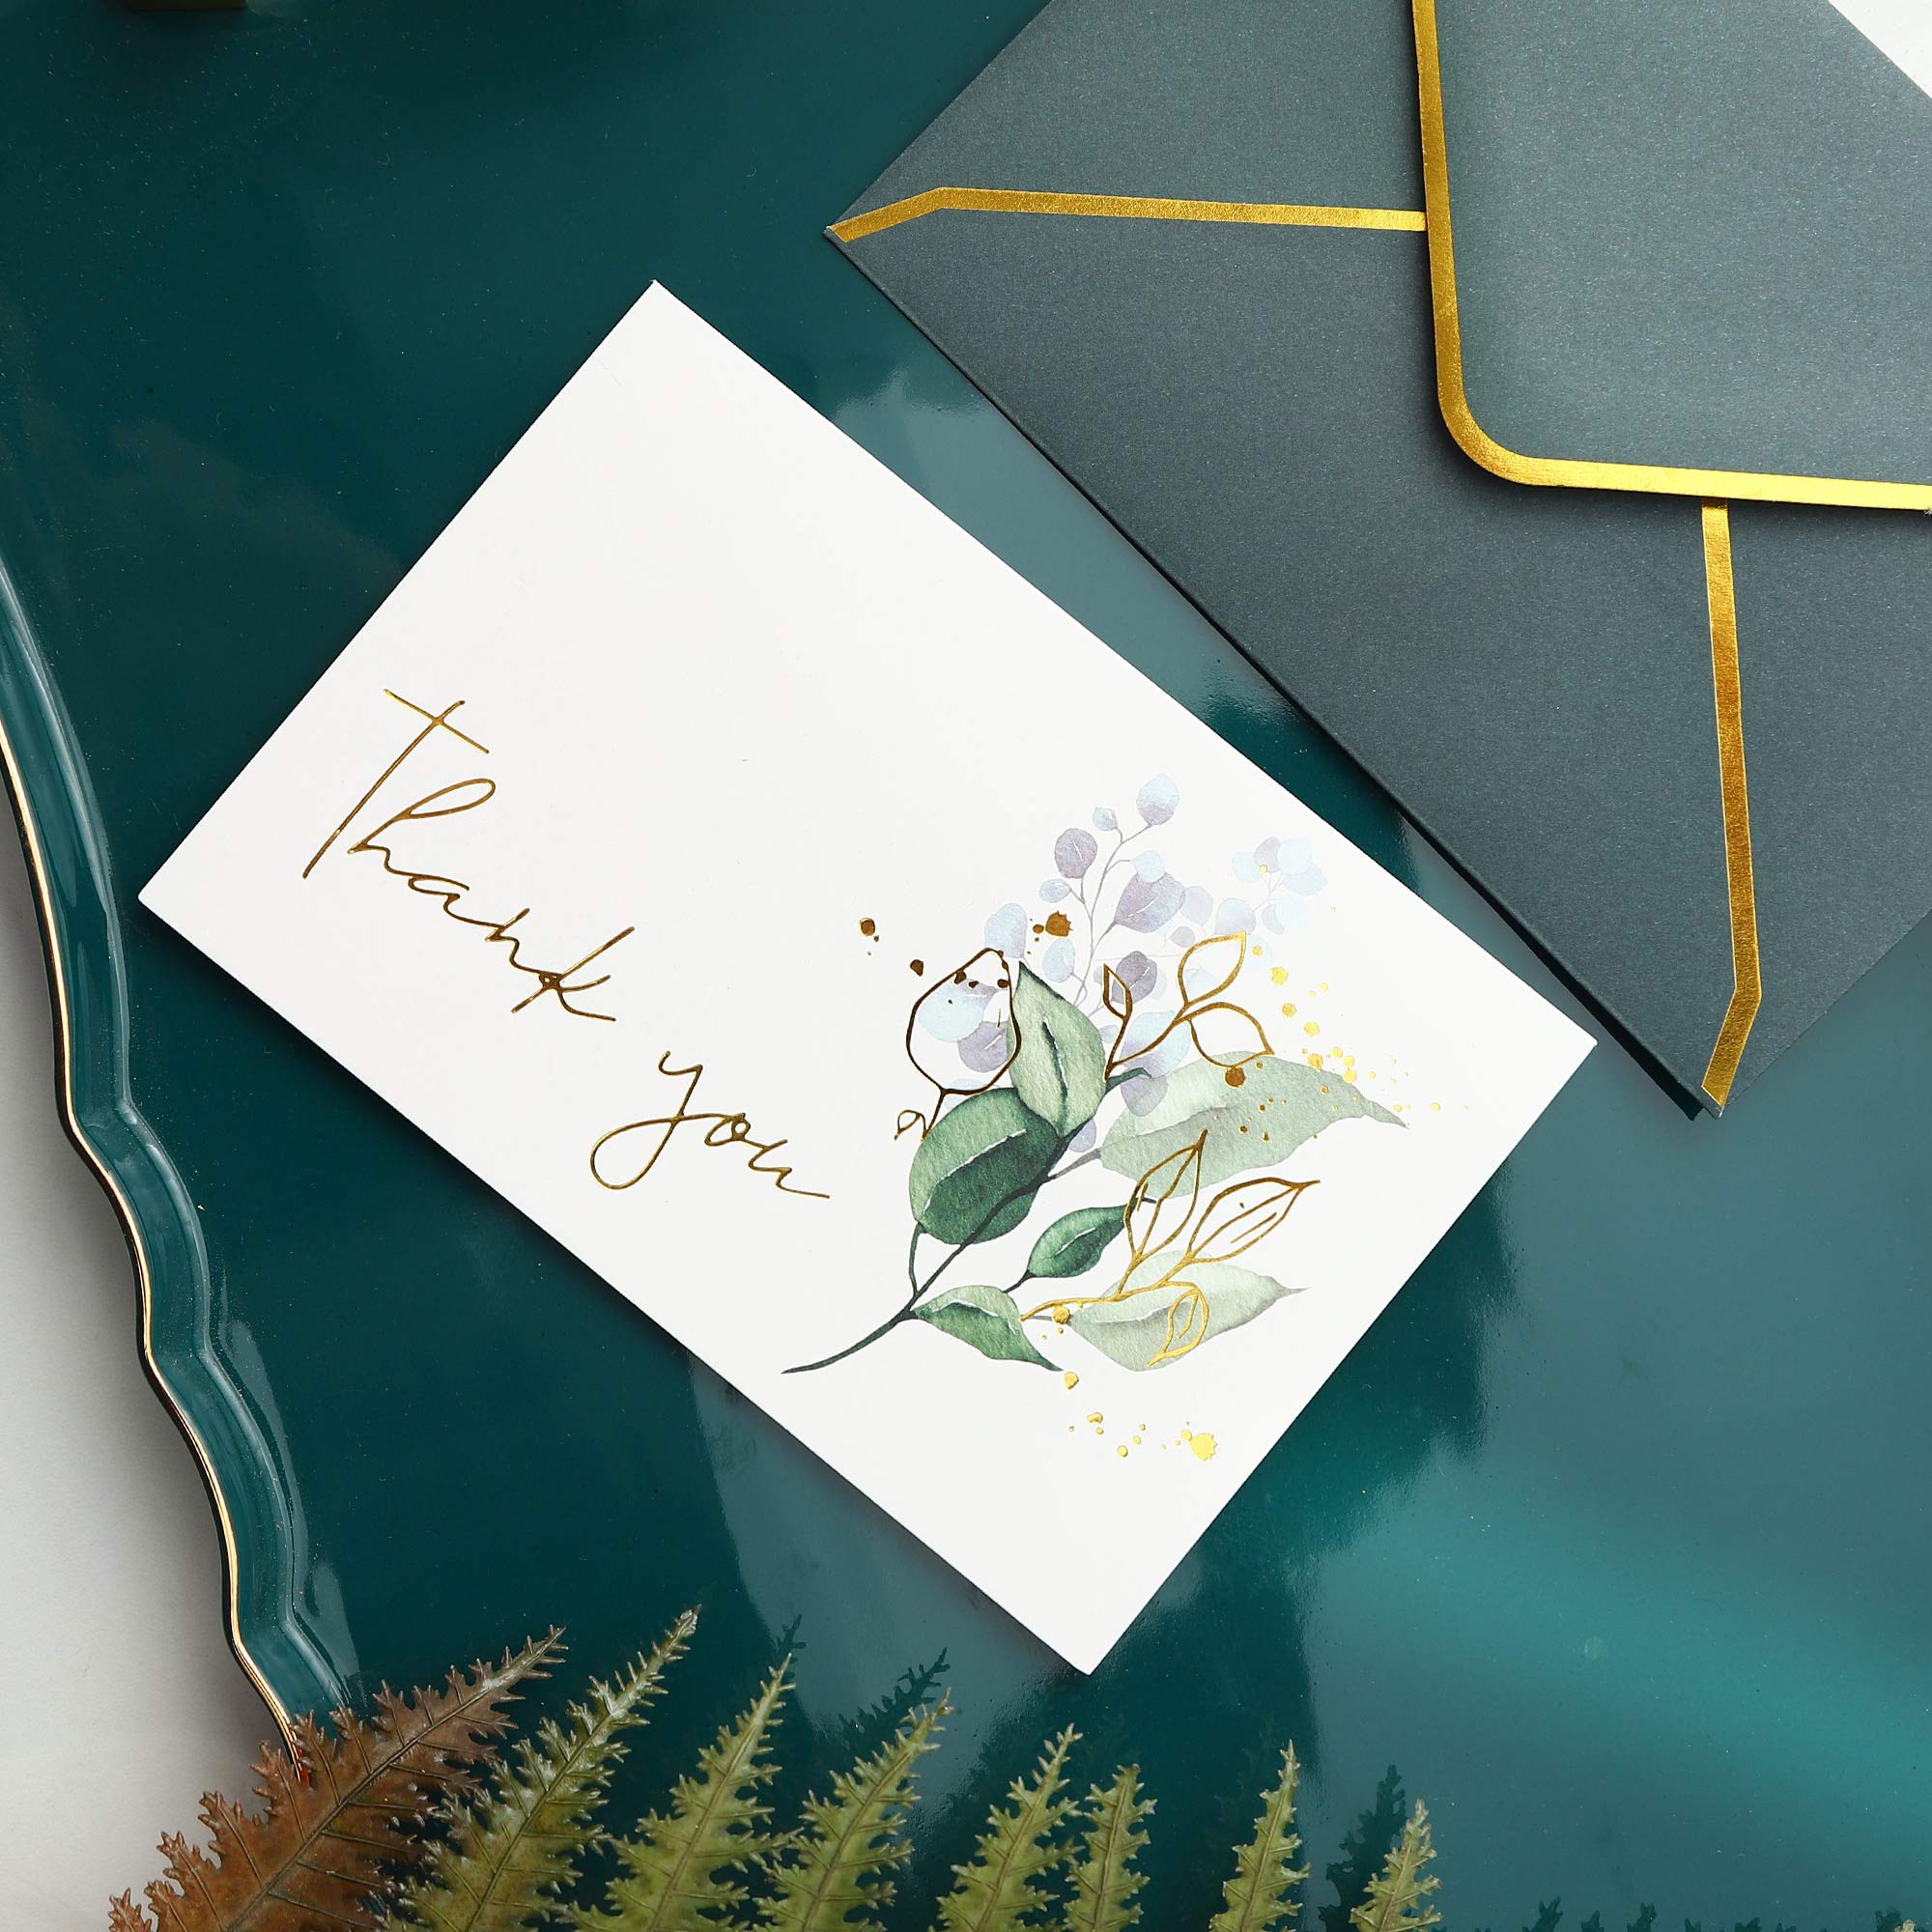 Heavy Duty Thank You Cards with Envelopes - 36 PK - Gold Thank You Notes 4x6 Inches Baby Shower Thank You Cards Wedding Thank You Cards Small Business Graduation Funeral Bridal Shower (Greenery)